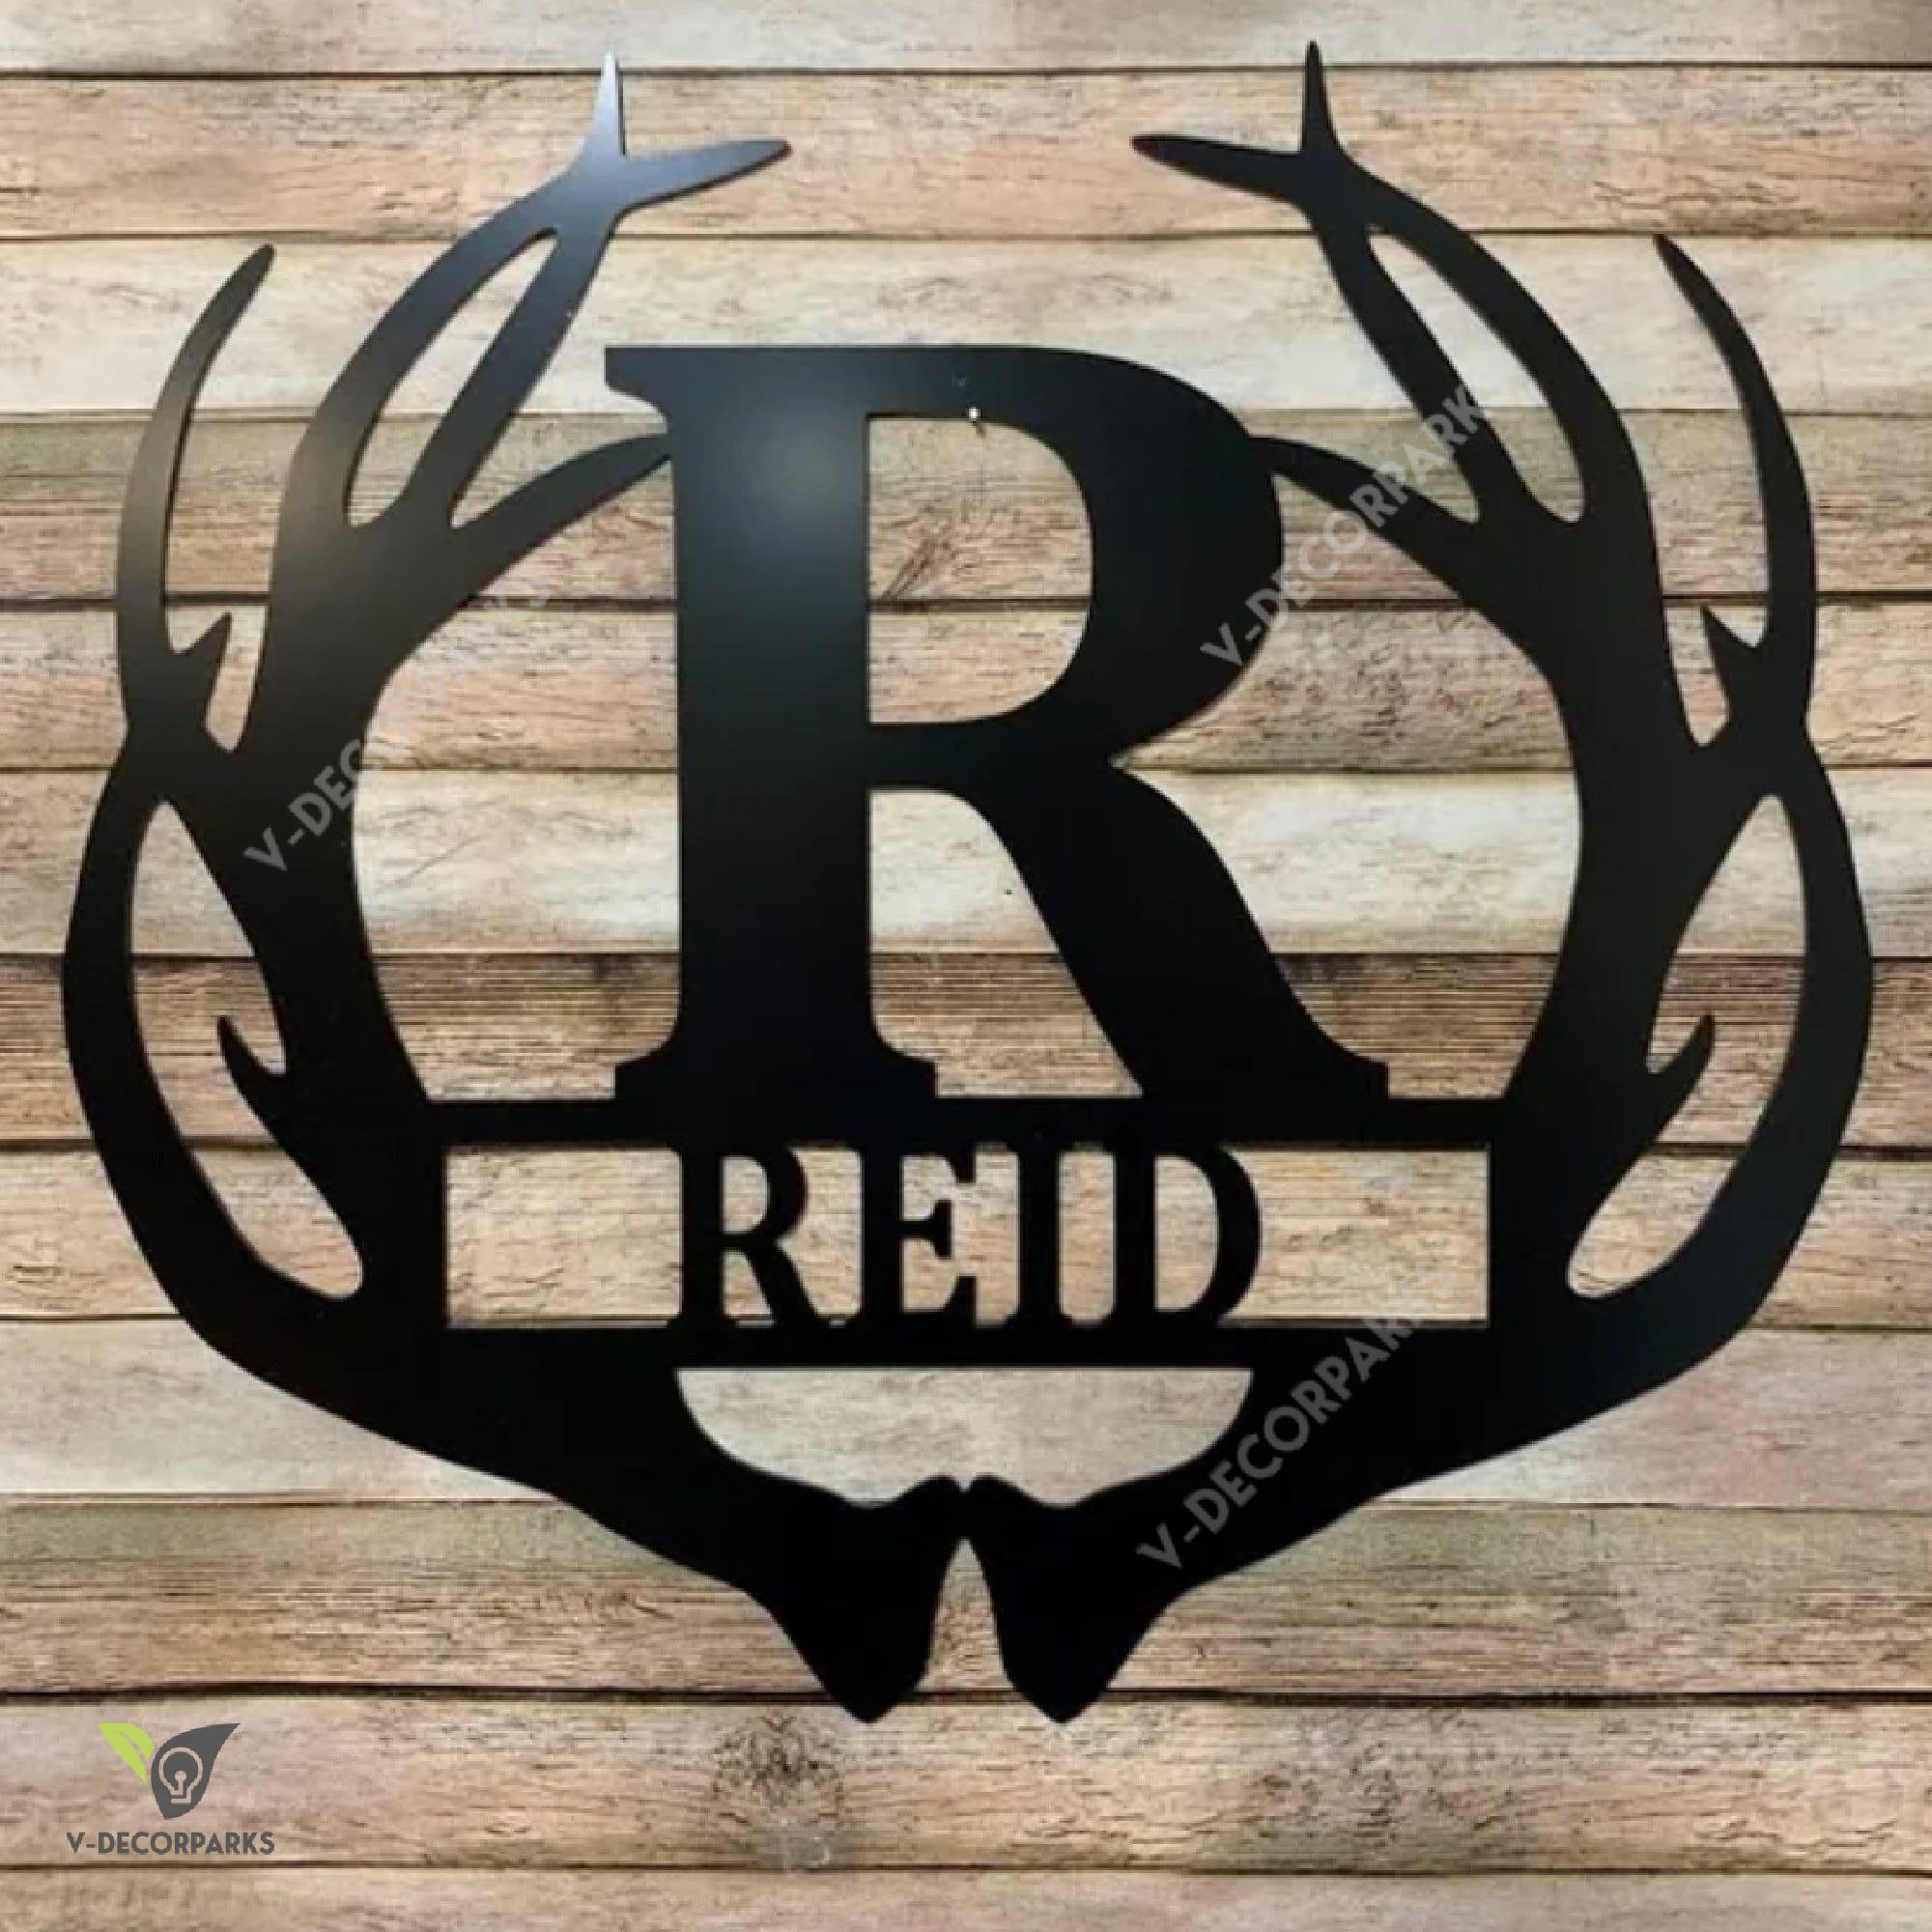 Antler Wreath - Personalized Family Antler Decor - Hunter - Deer Camp Sign - Deer Antlers - Family Monogram Wall Decor - Hunting Signs